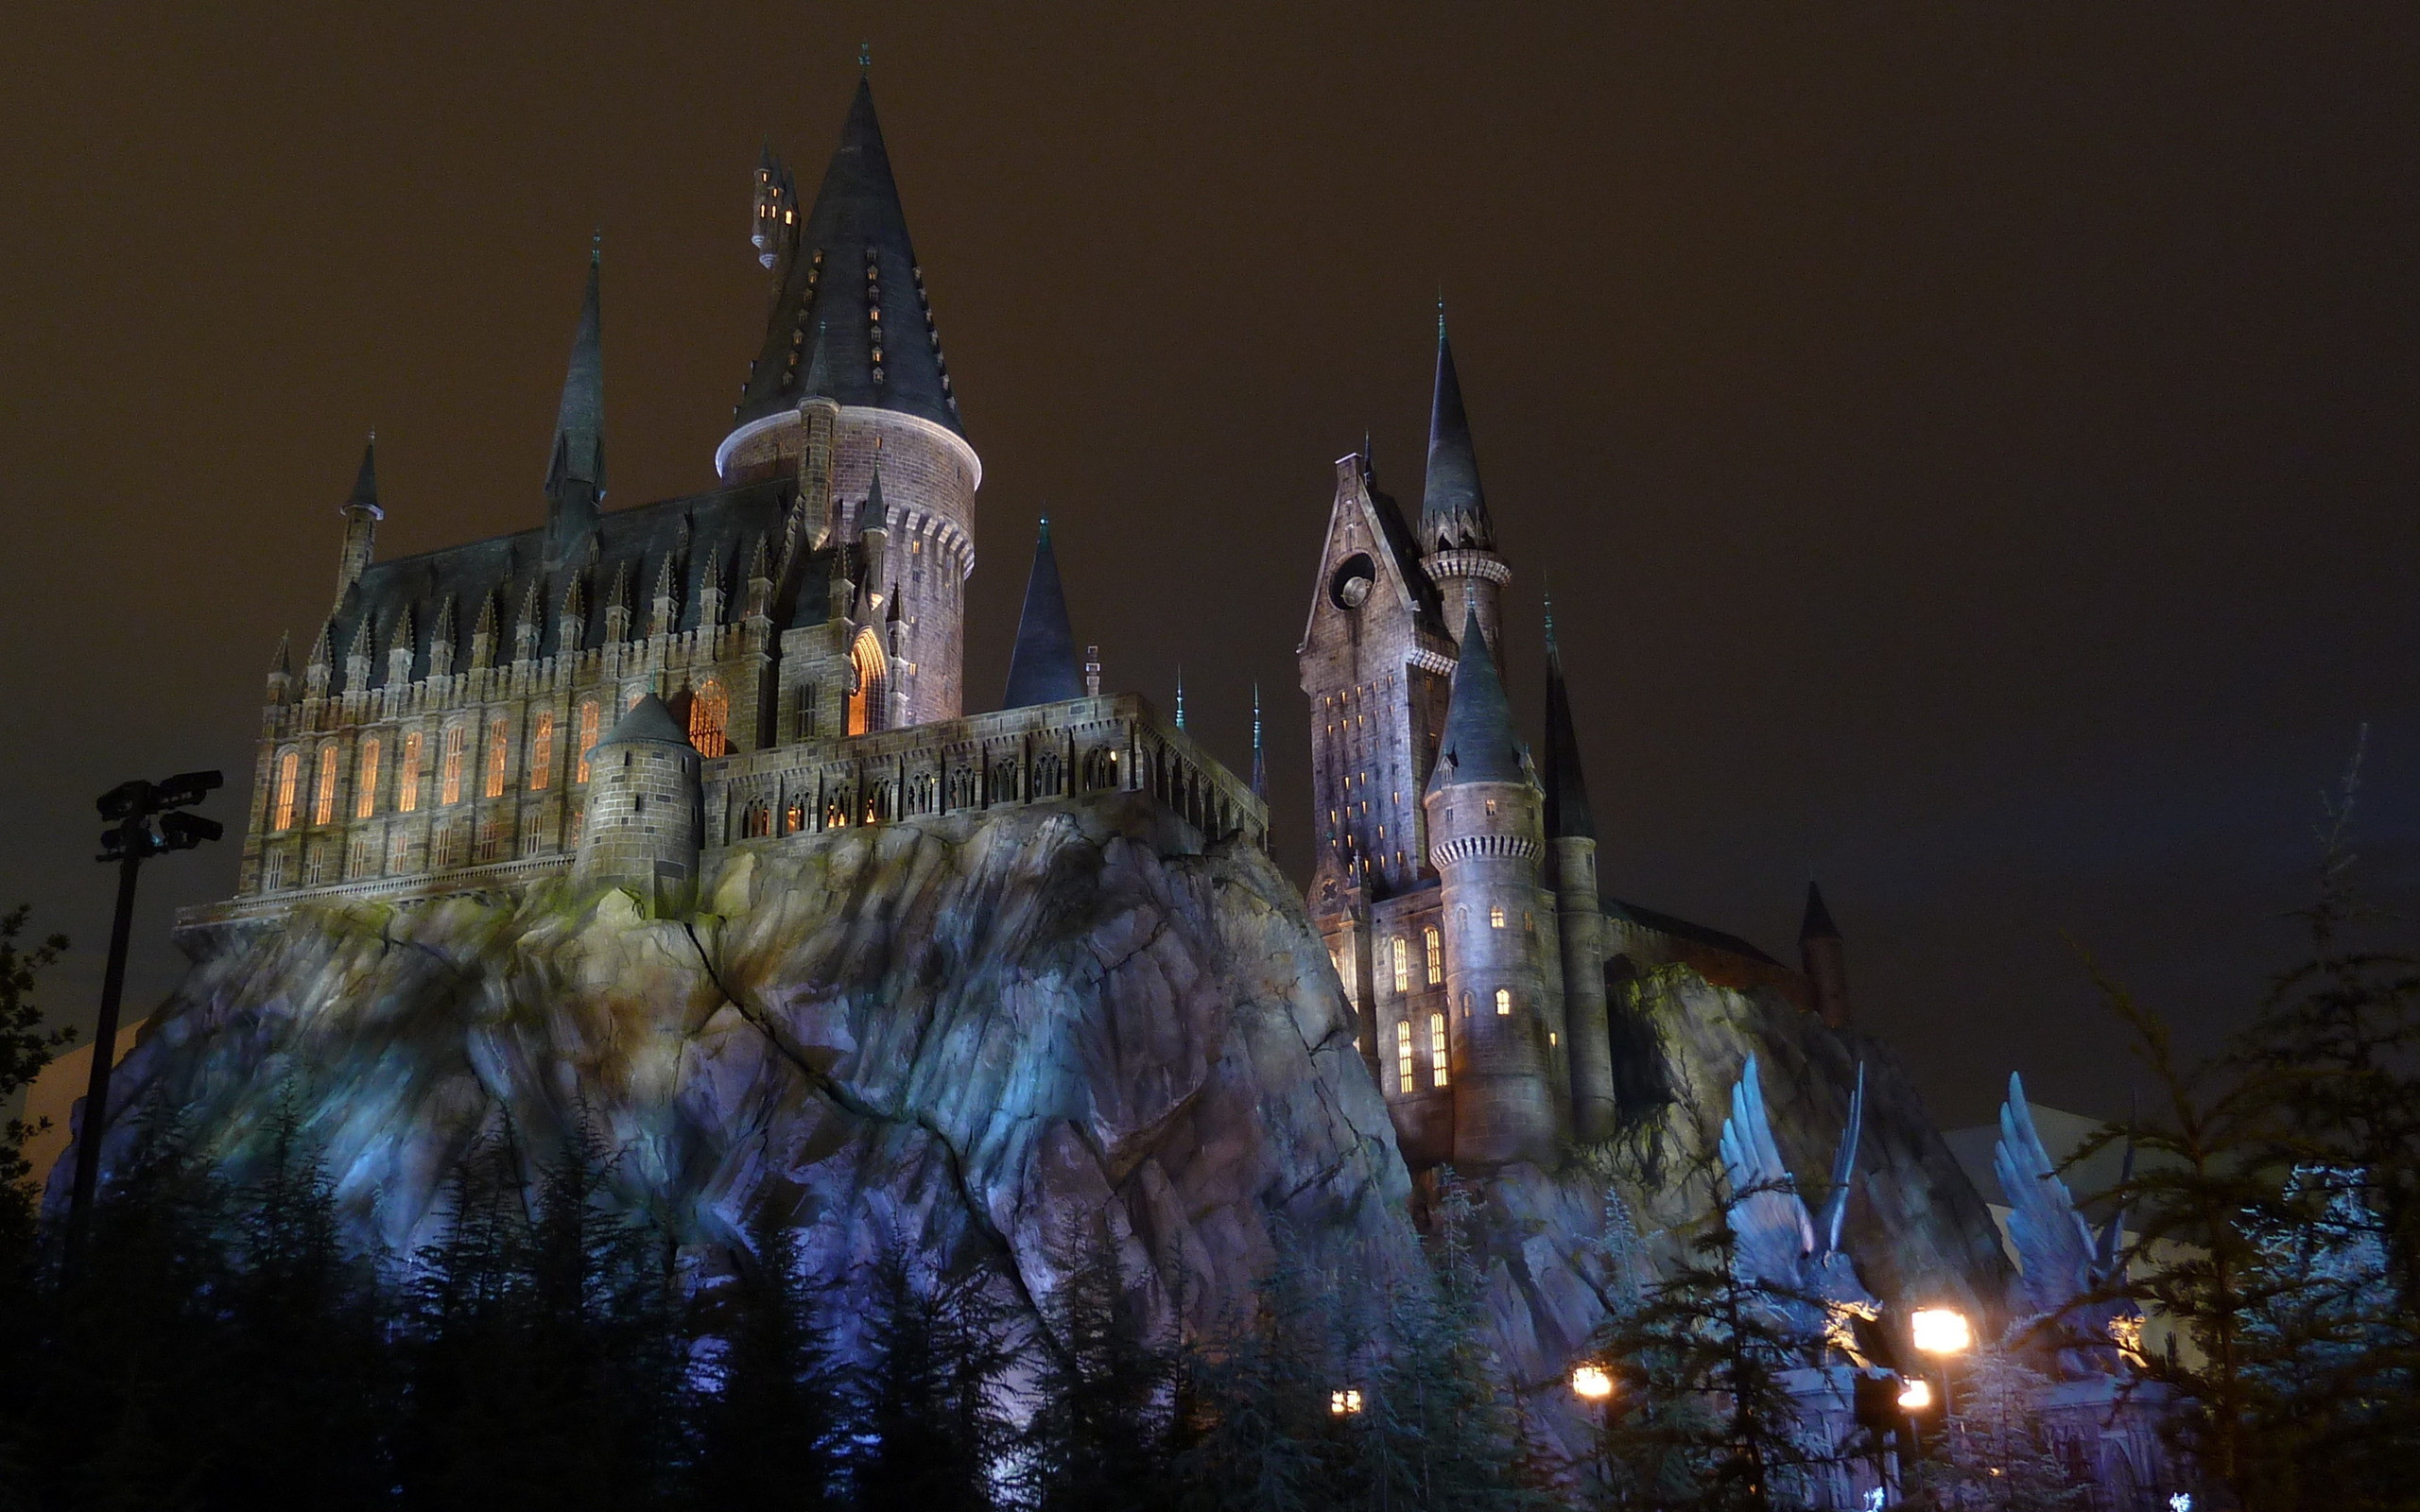 2560x1600 Harry Potter, Hogwarts castle wallpapers and images - wallpapers .